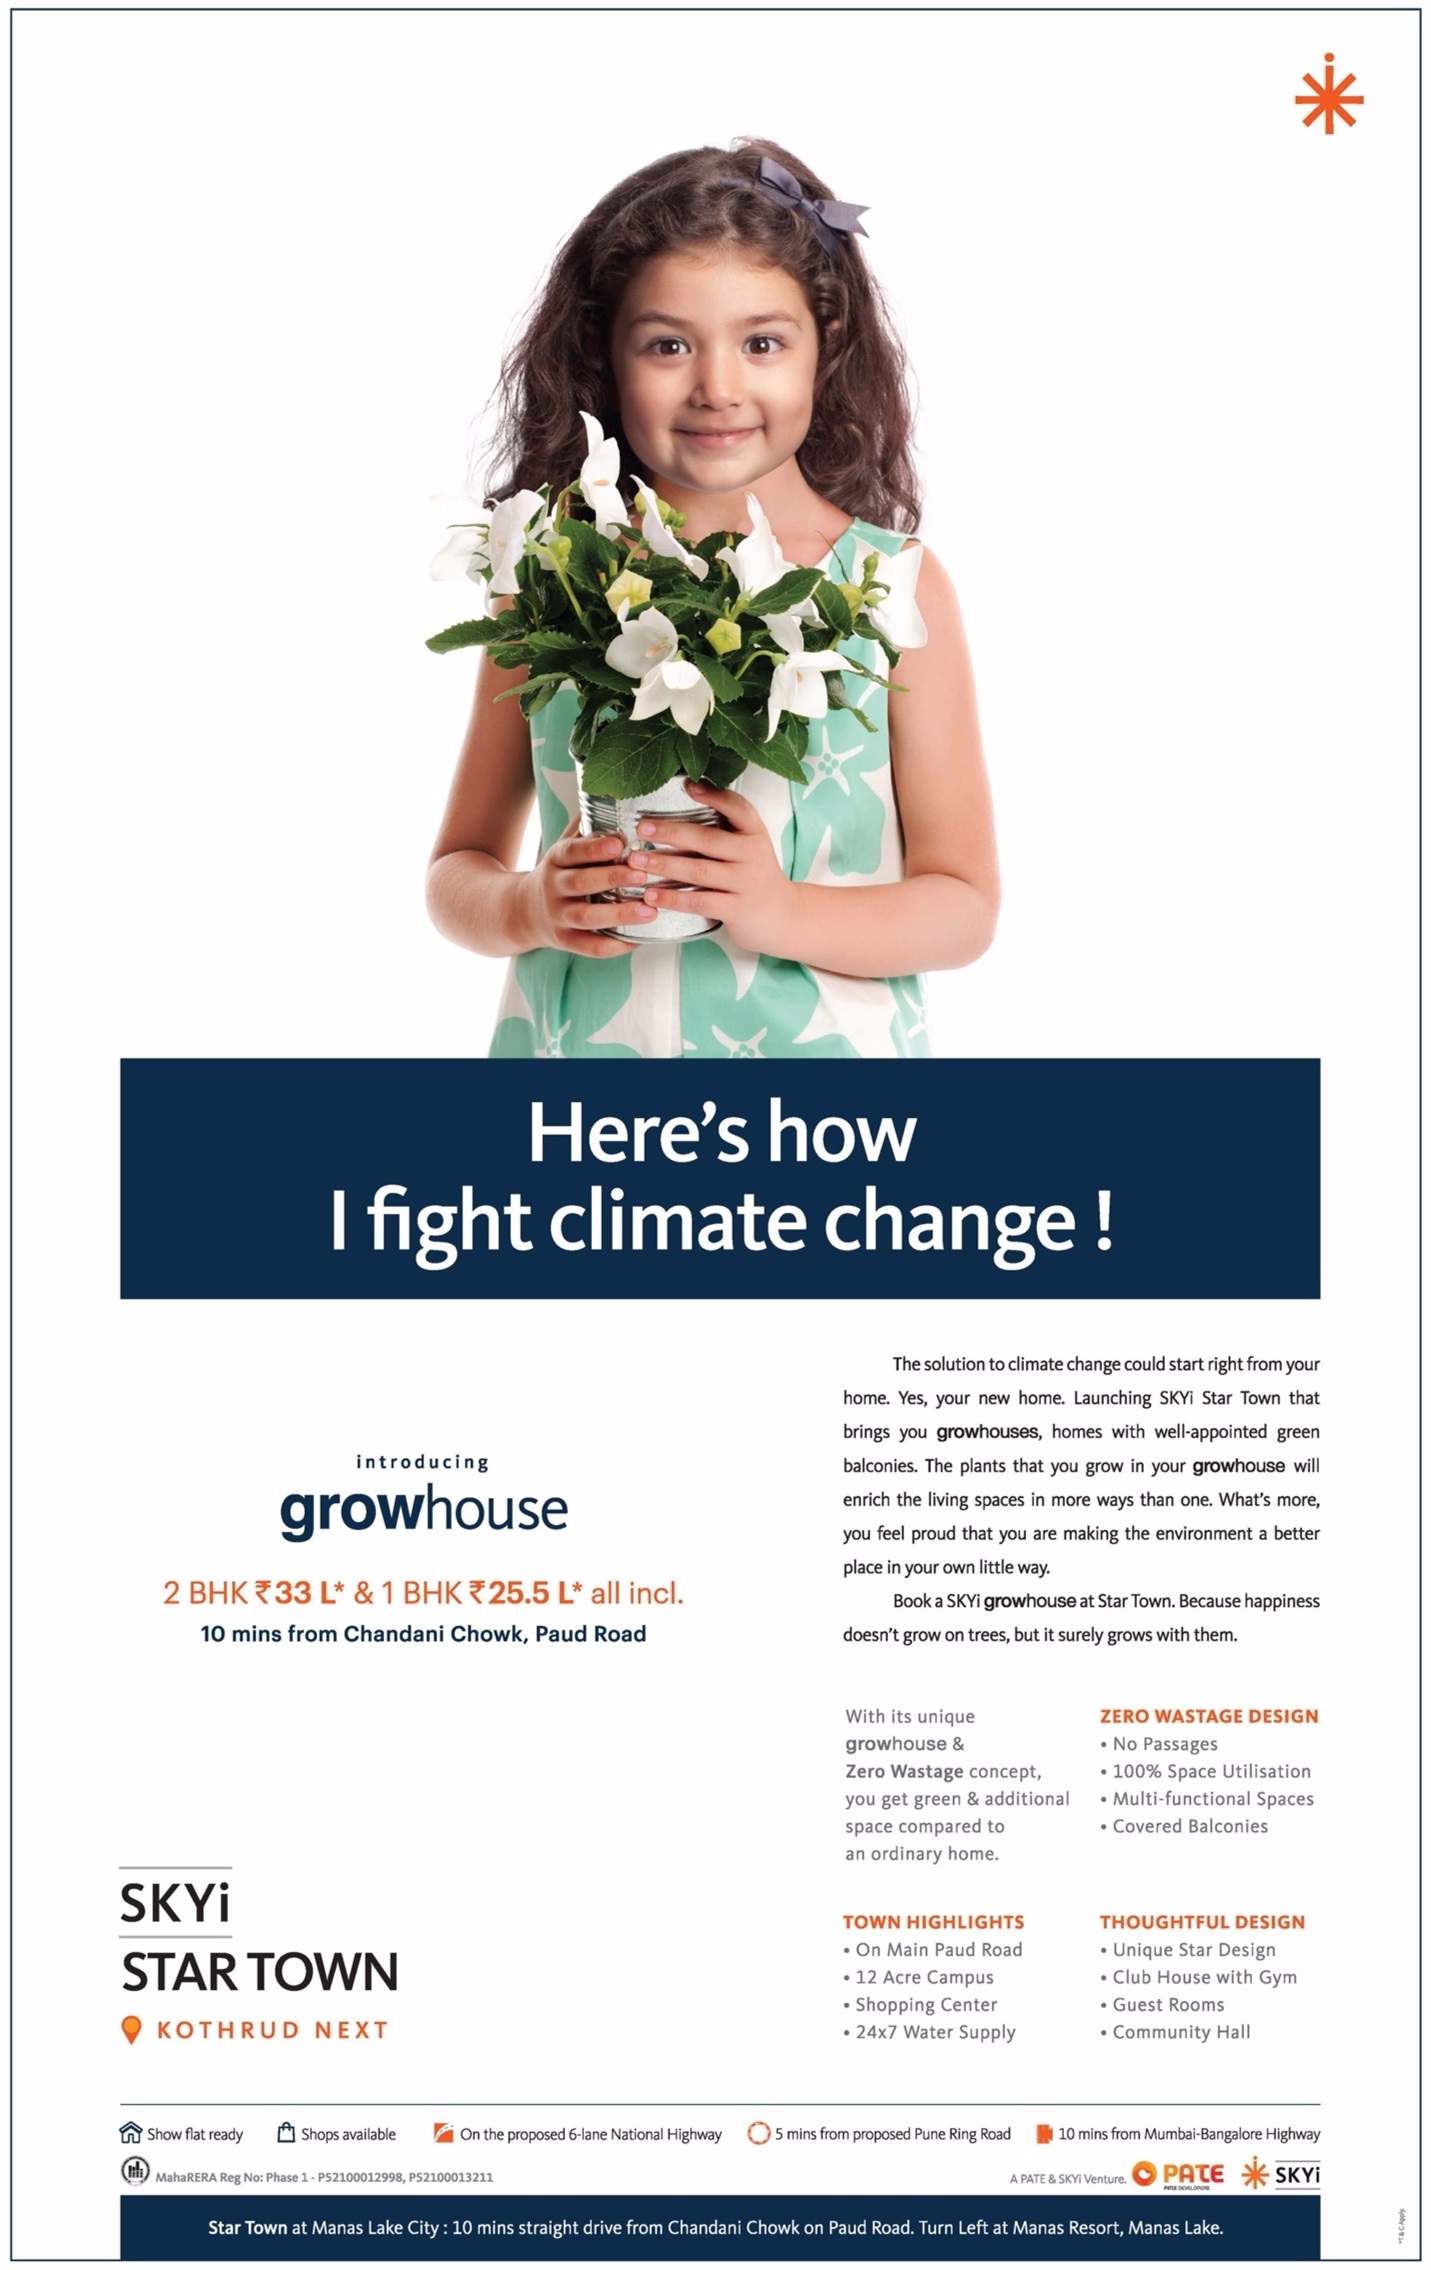 Introducing Growhouse at SKYi Star Town in Pune